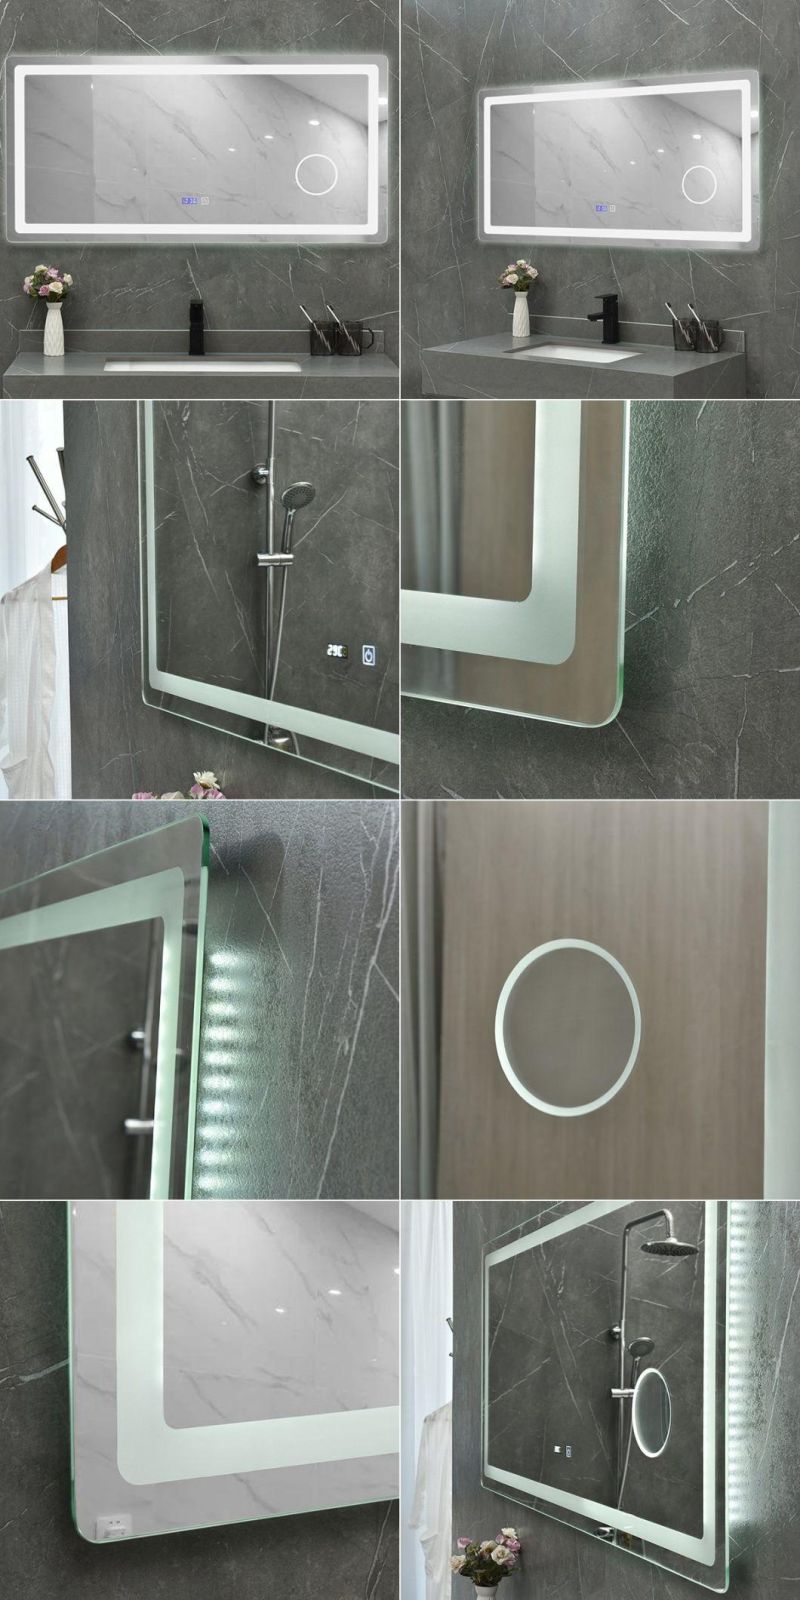 Rectangle 3X Magnifying and Time Display Bathroom LED Backlit Glass Mirror